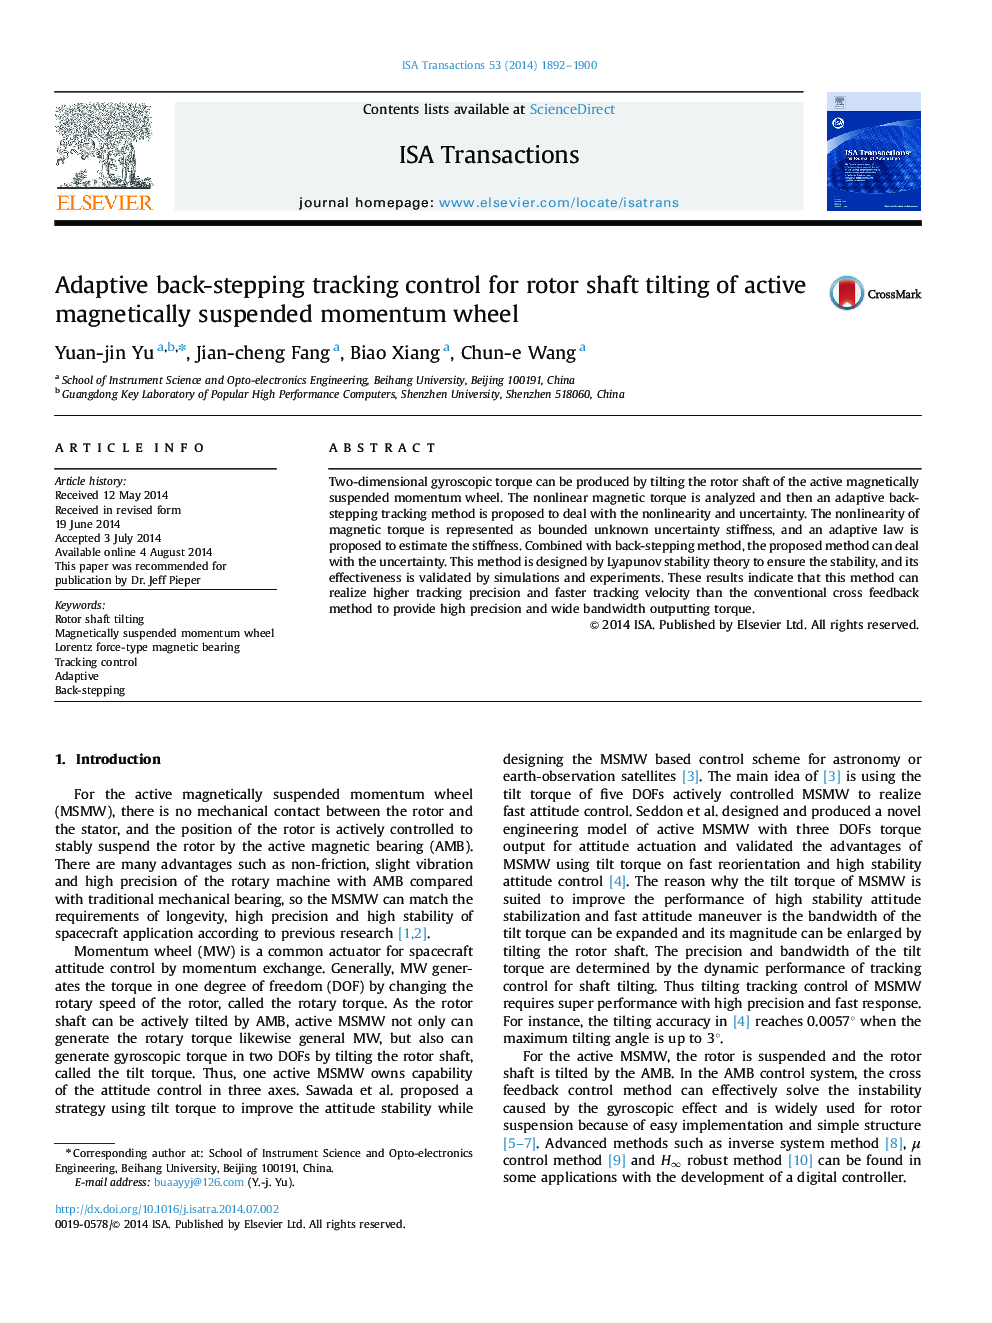 Adaptive back-stepping tracking control for rotor shaft tilting of active magnetically suspended momentum wheel